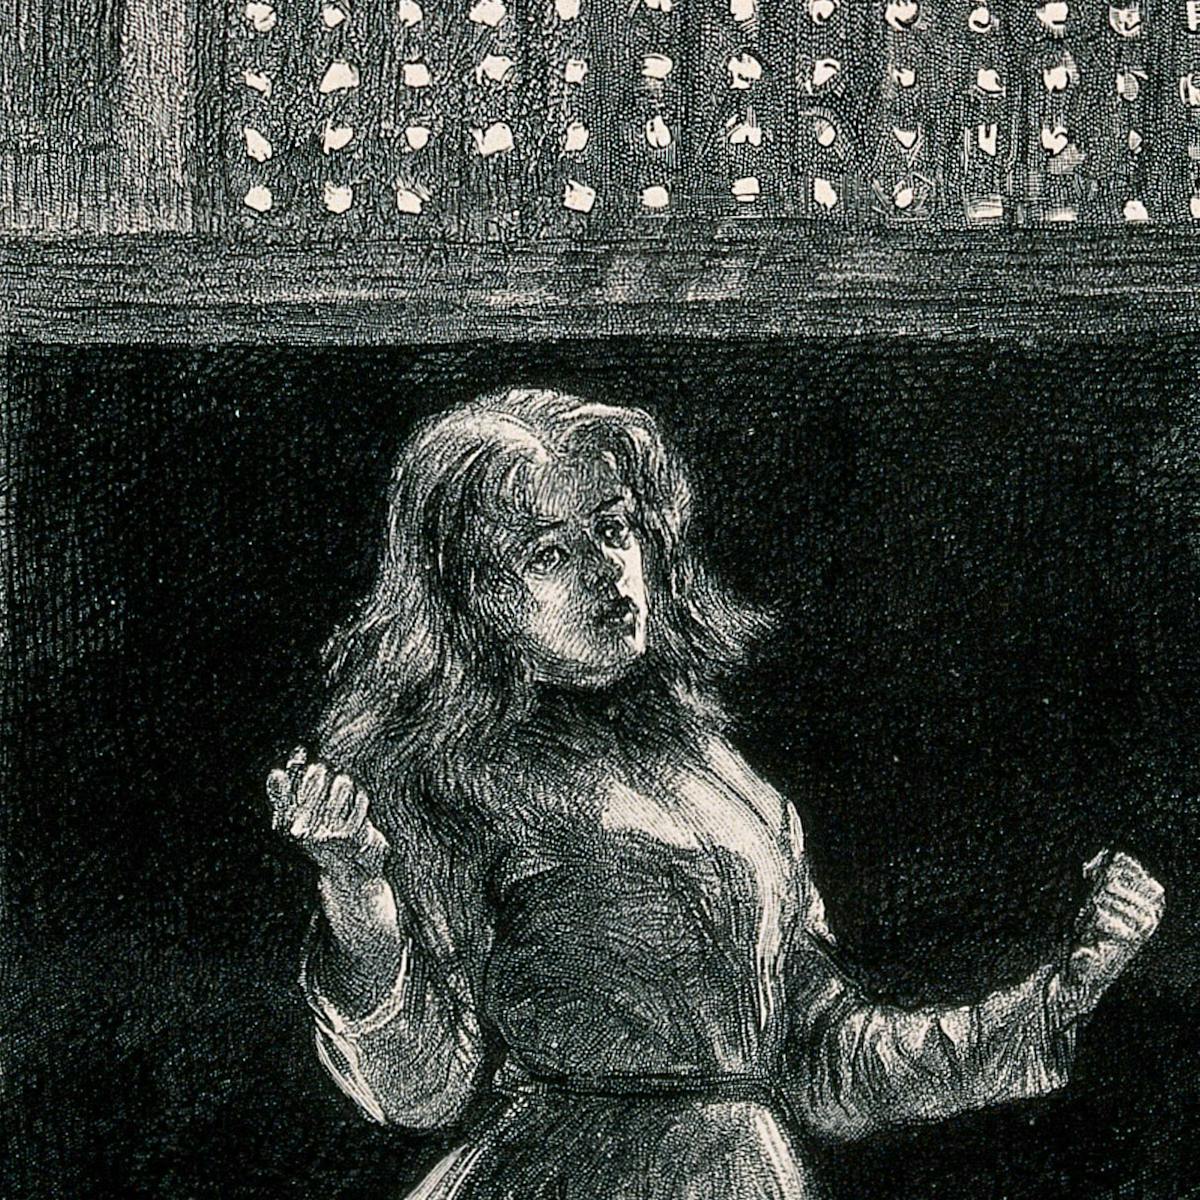 Woking Convict Invalid Prison: a woman prisoner in solitary confinement. Process print after P. Renouard, 1889.